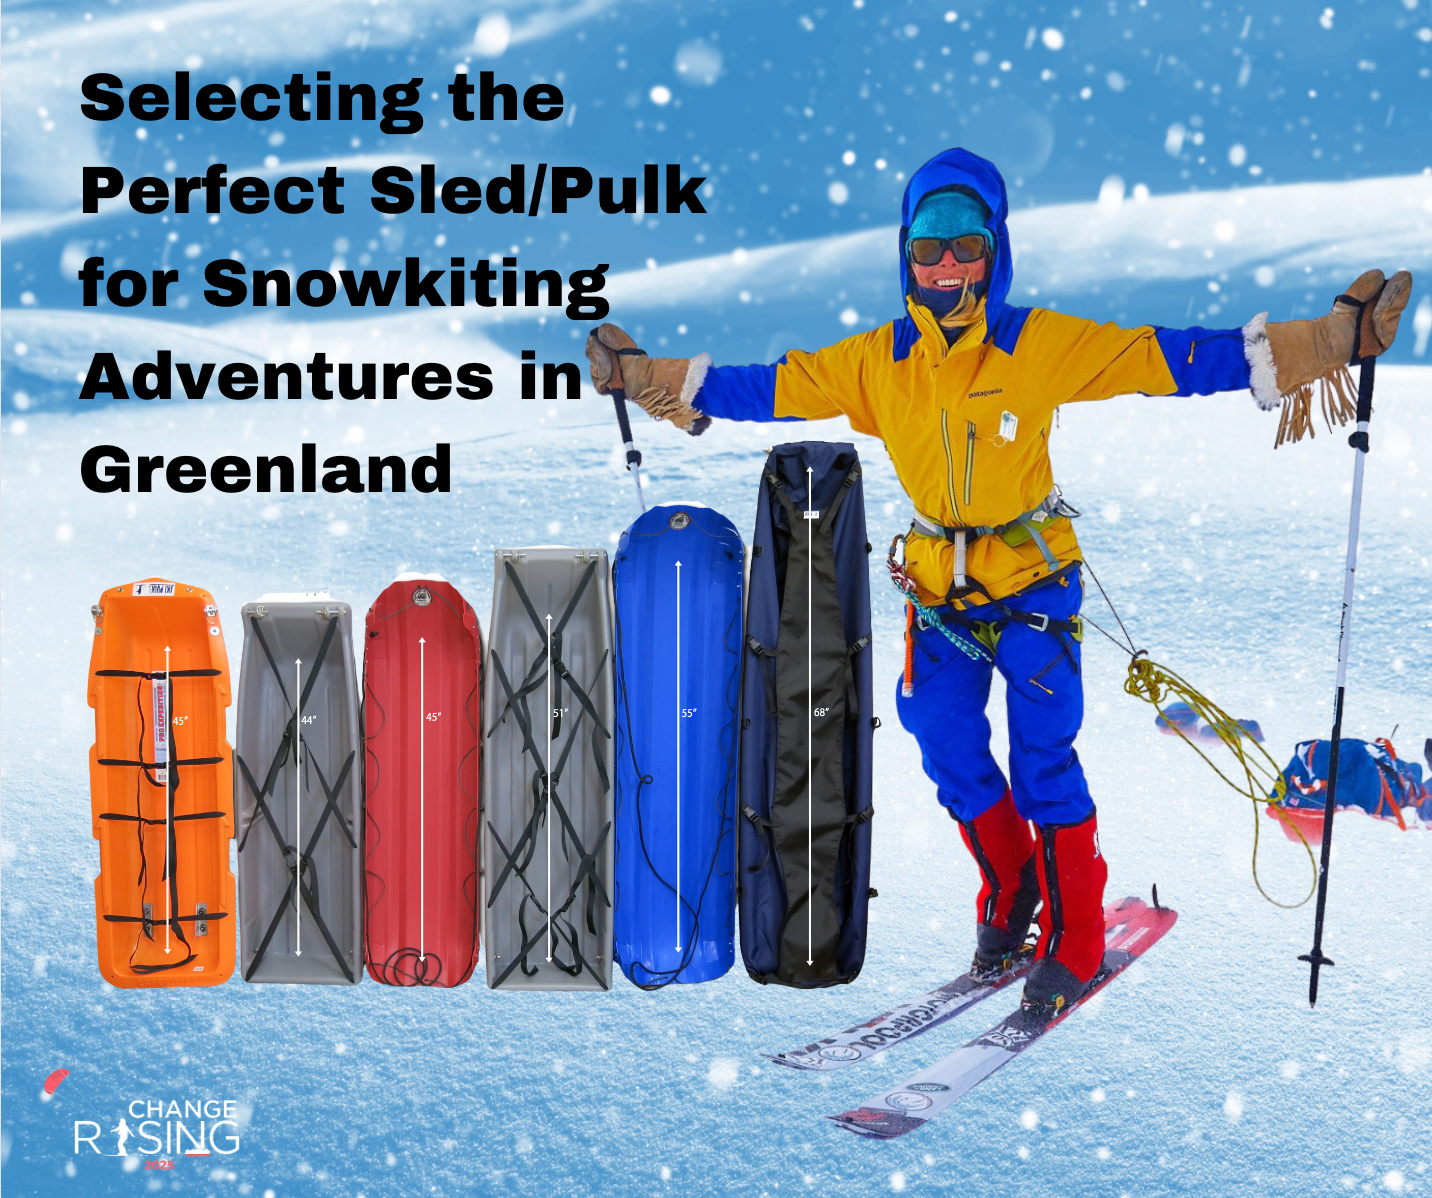 Selecting the Perfect Sled/Pulk for Snowkiting Adventures in Greenland